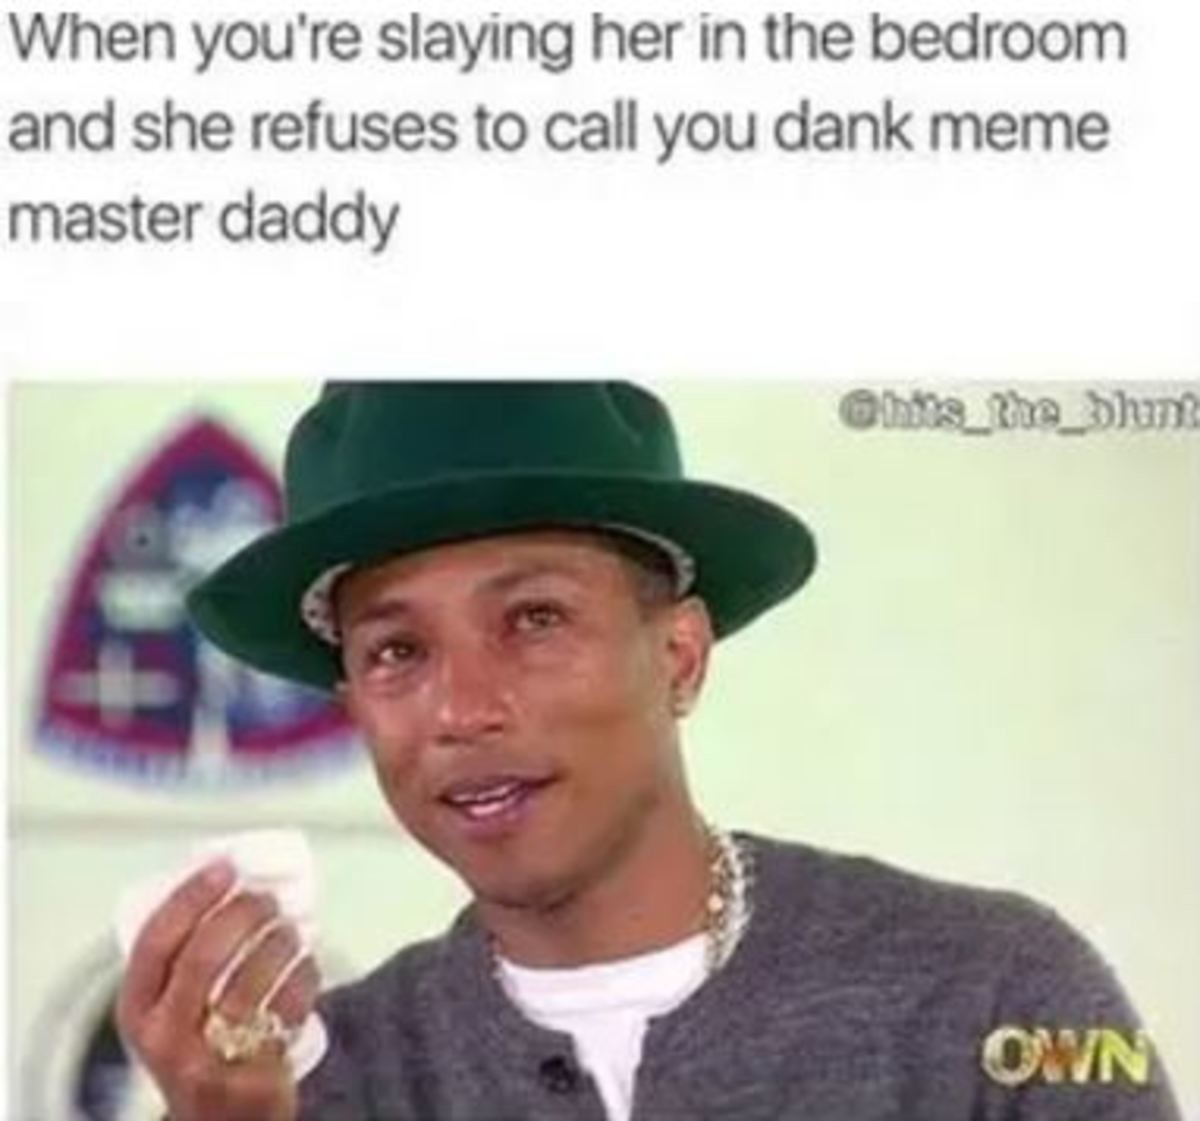 Master P. . Ili/ N/ tten you' re slaying her in the bedroom and she refuses to can you dank master daddy